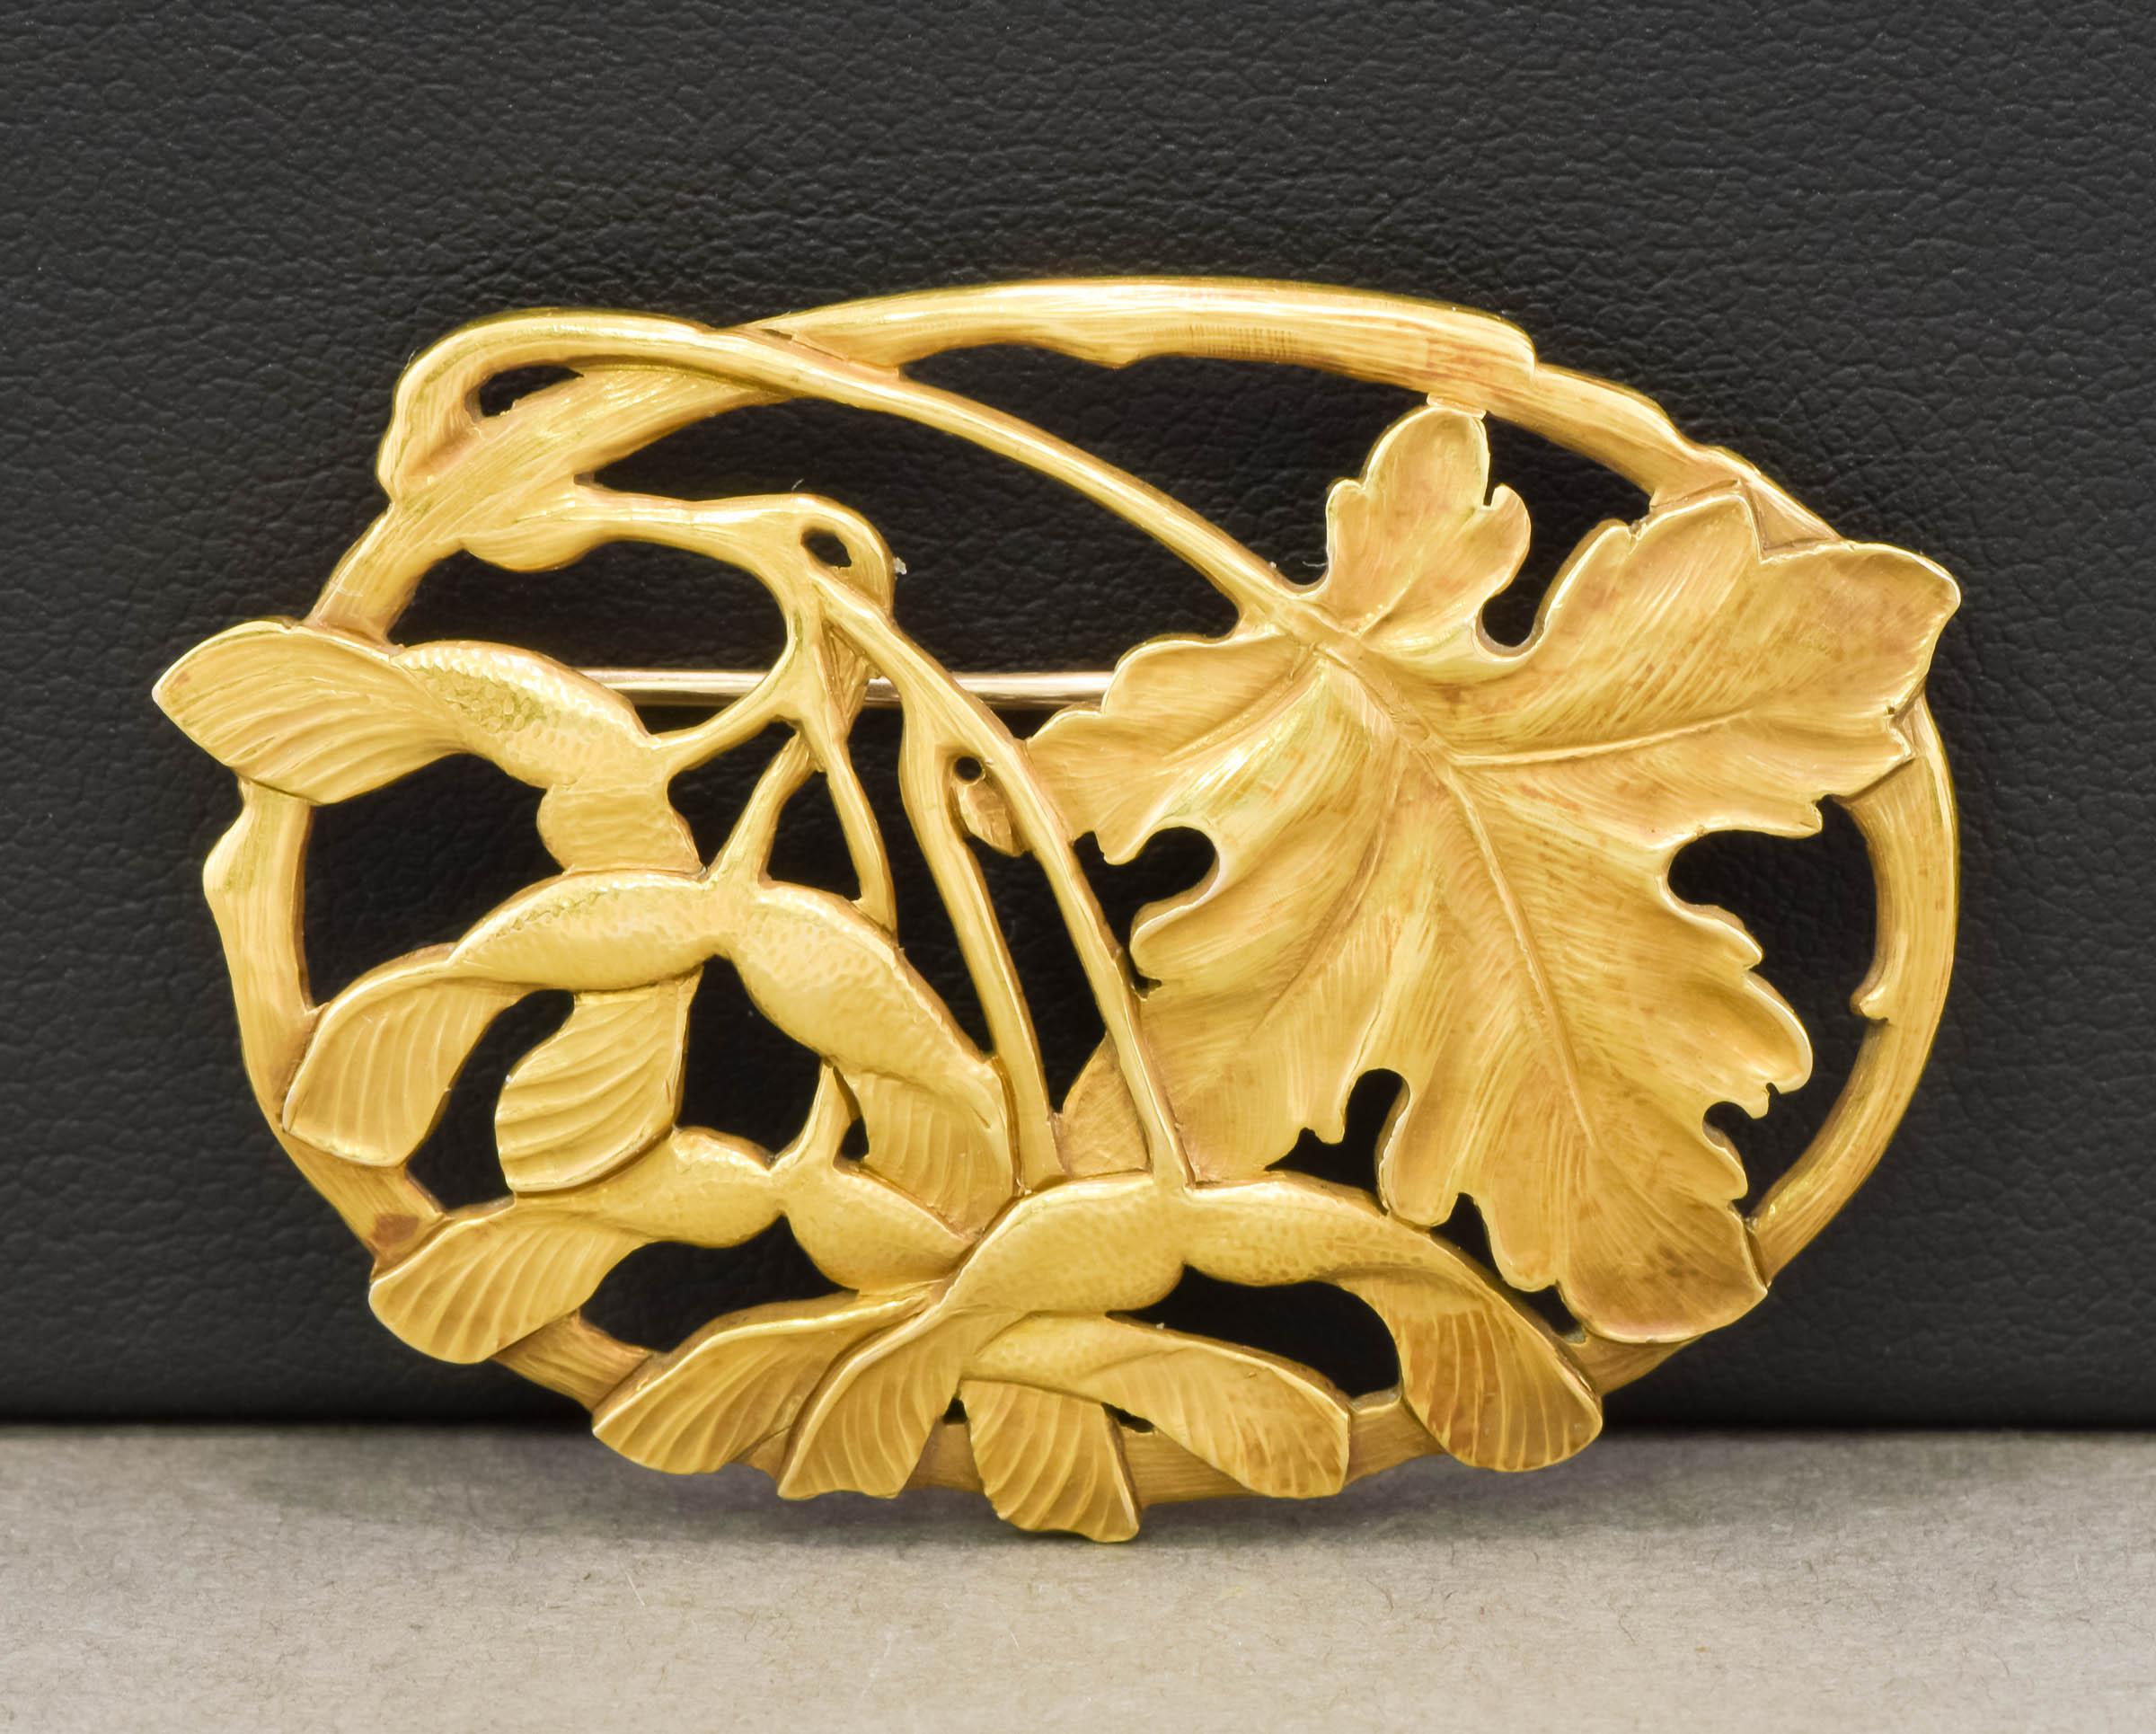 I'm delighted to offer a very special and hard to find Arts & Crafts period gold brooch by the esteemed Potter Studio (Horace Potter).  Beautifully made of 18K yellow gold (with a 14K pin stem), the large brooch features a maple leaf with samaras